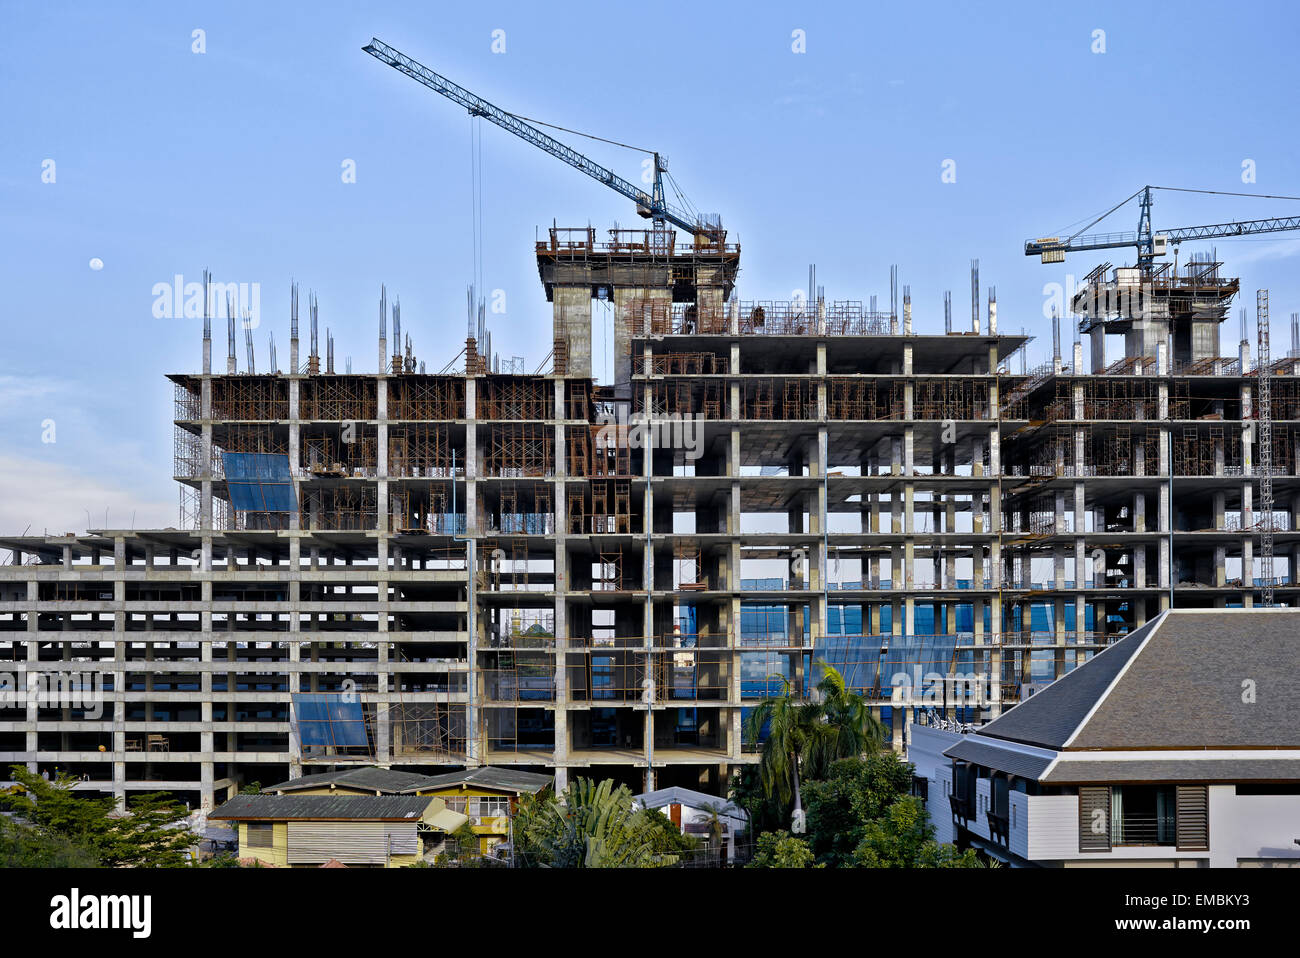 Multi-story building in the early stages of construction. Stock Photo